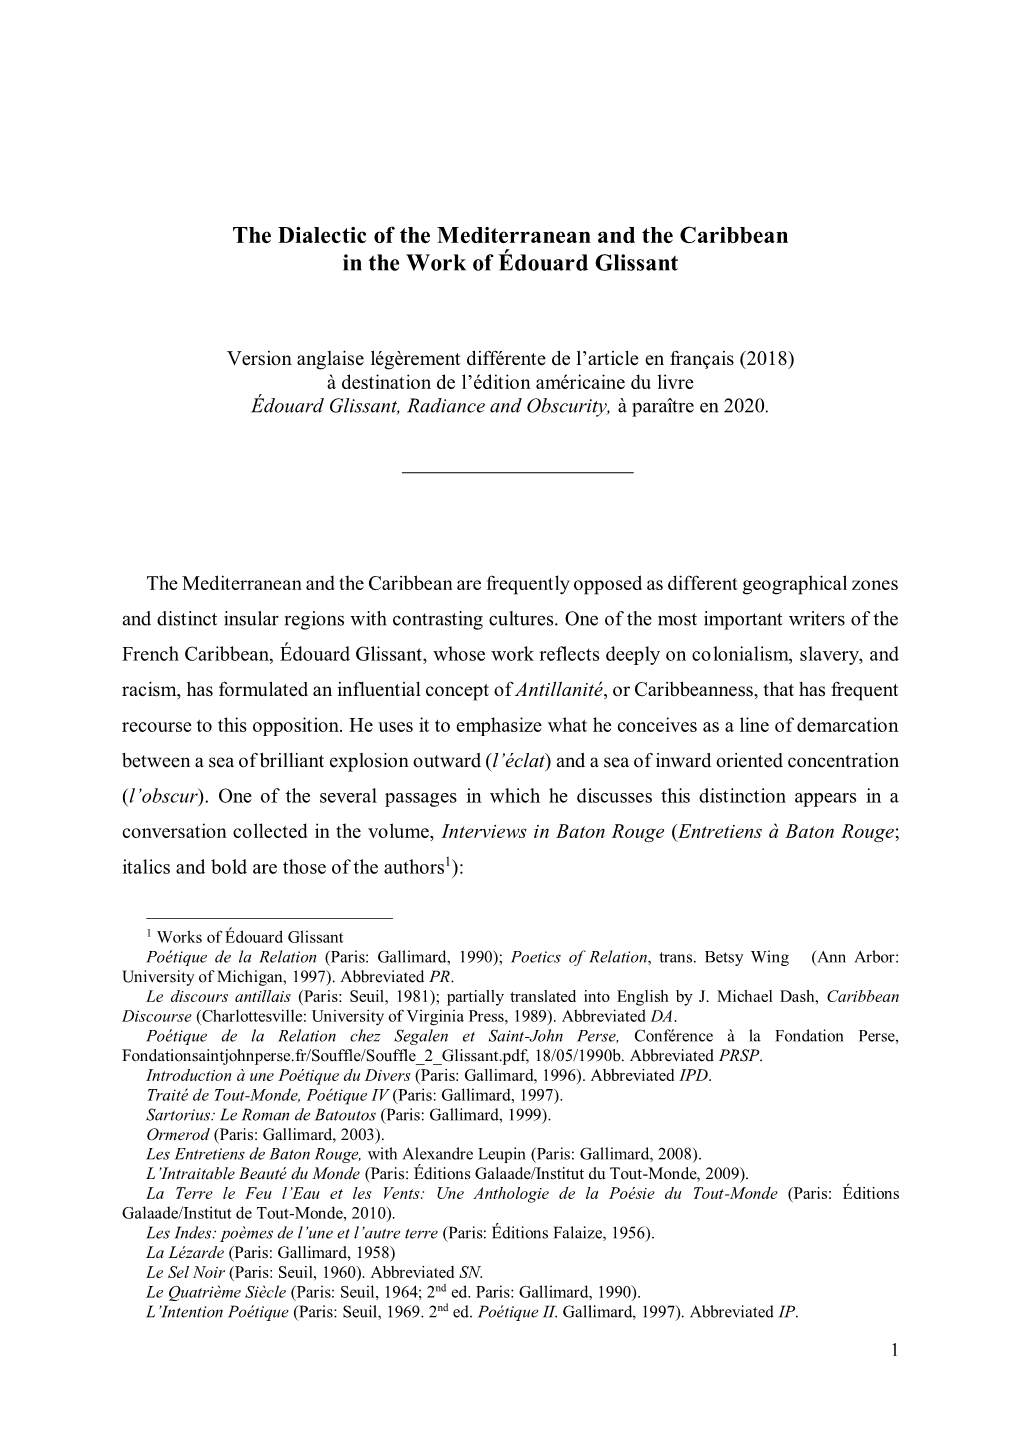 The Dialectic of the Mediterranean and the Caribbean in the Work of Édouard Glissant